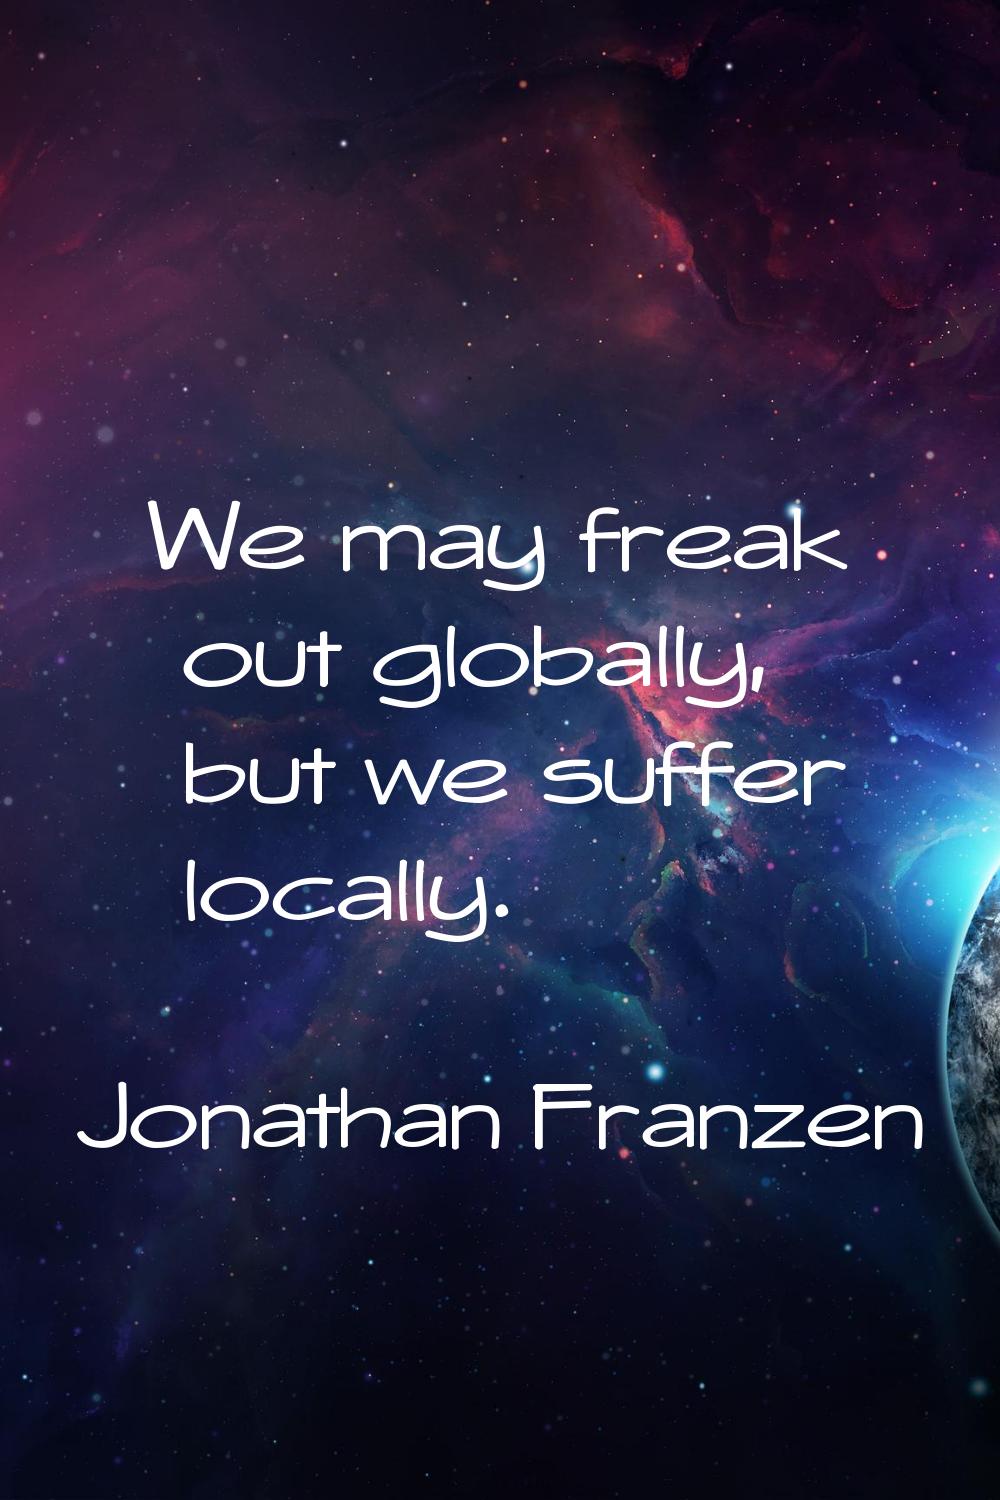 We may freak out globally, but we suffer locally.